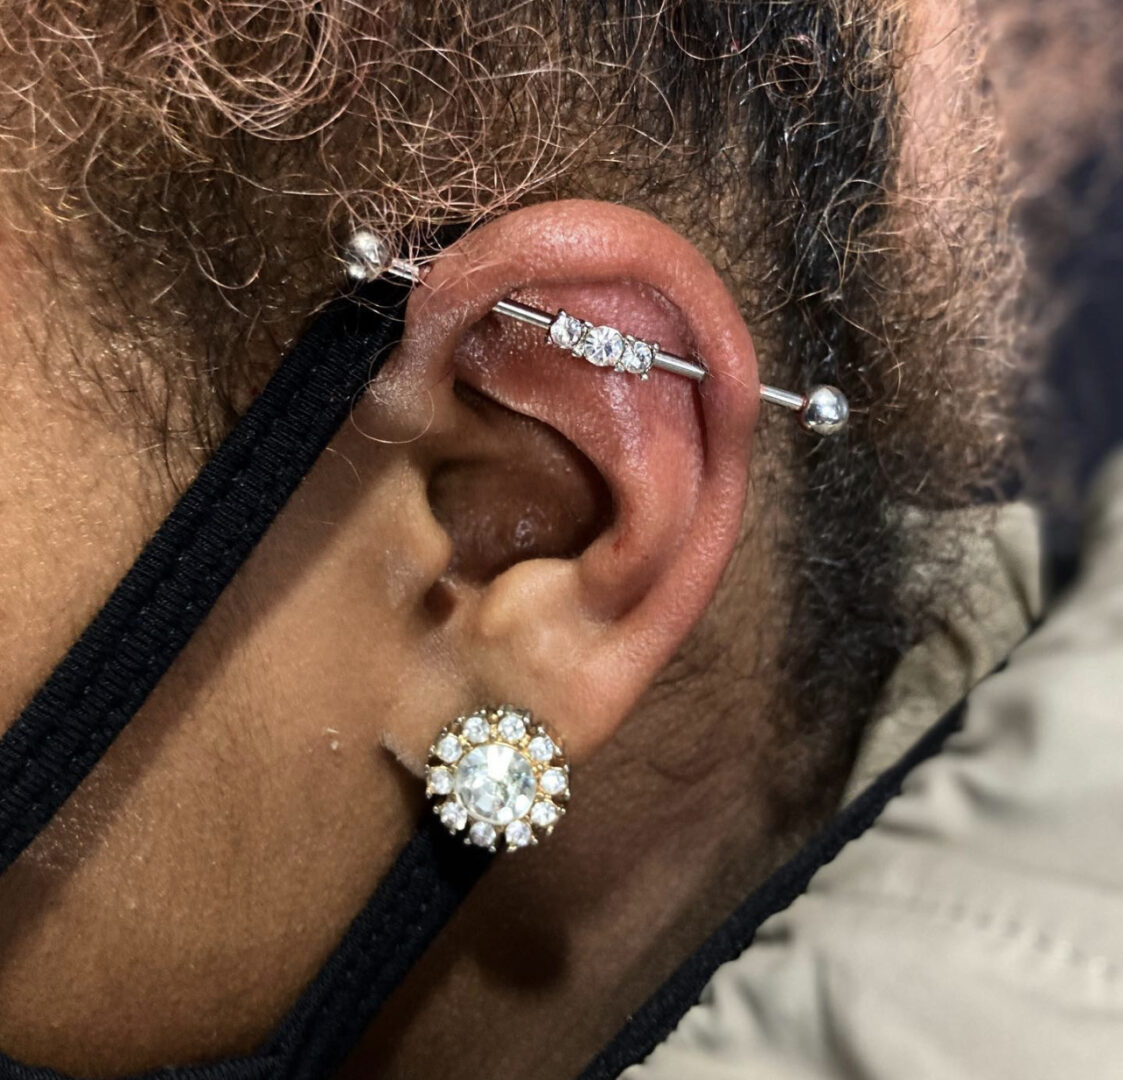 A man with his ear piercings and a diamond earring.